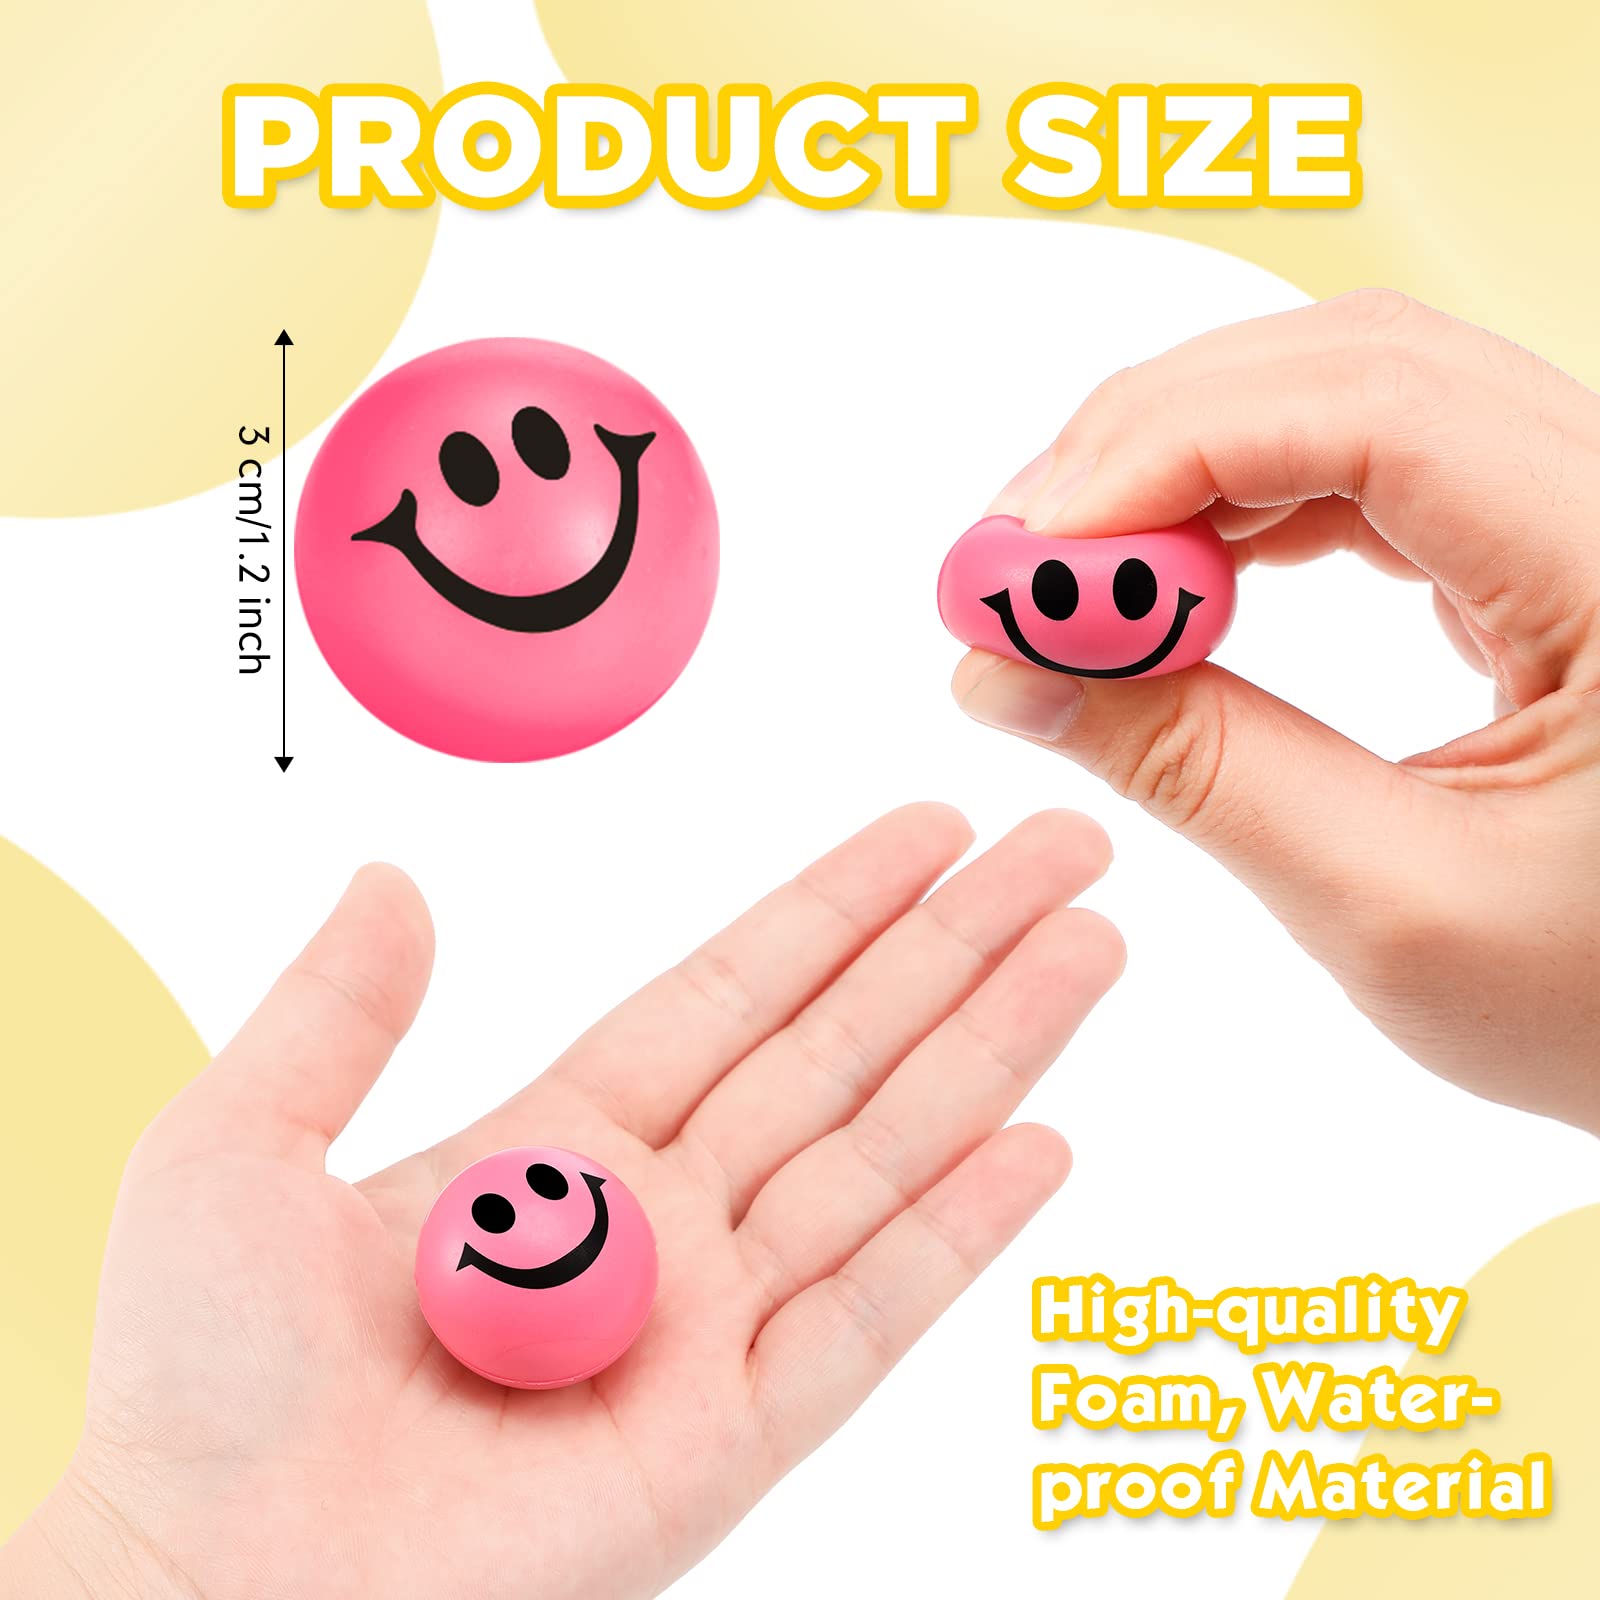 Skylety 100 Pieces Mini Stress Balls for Adults Soft Foam Funny Face Small Colored Be Happy Smile Ball 1.2 Inch Relief Balls(Assorted Colors) (SE-Skylety-465844)